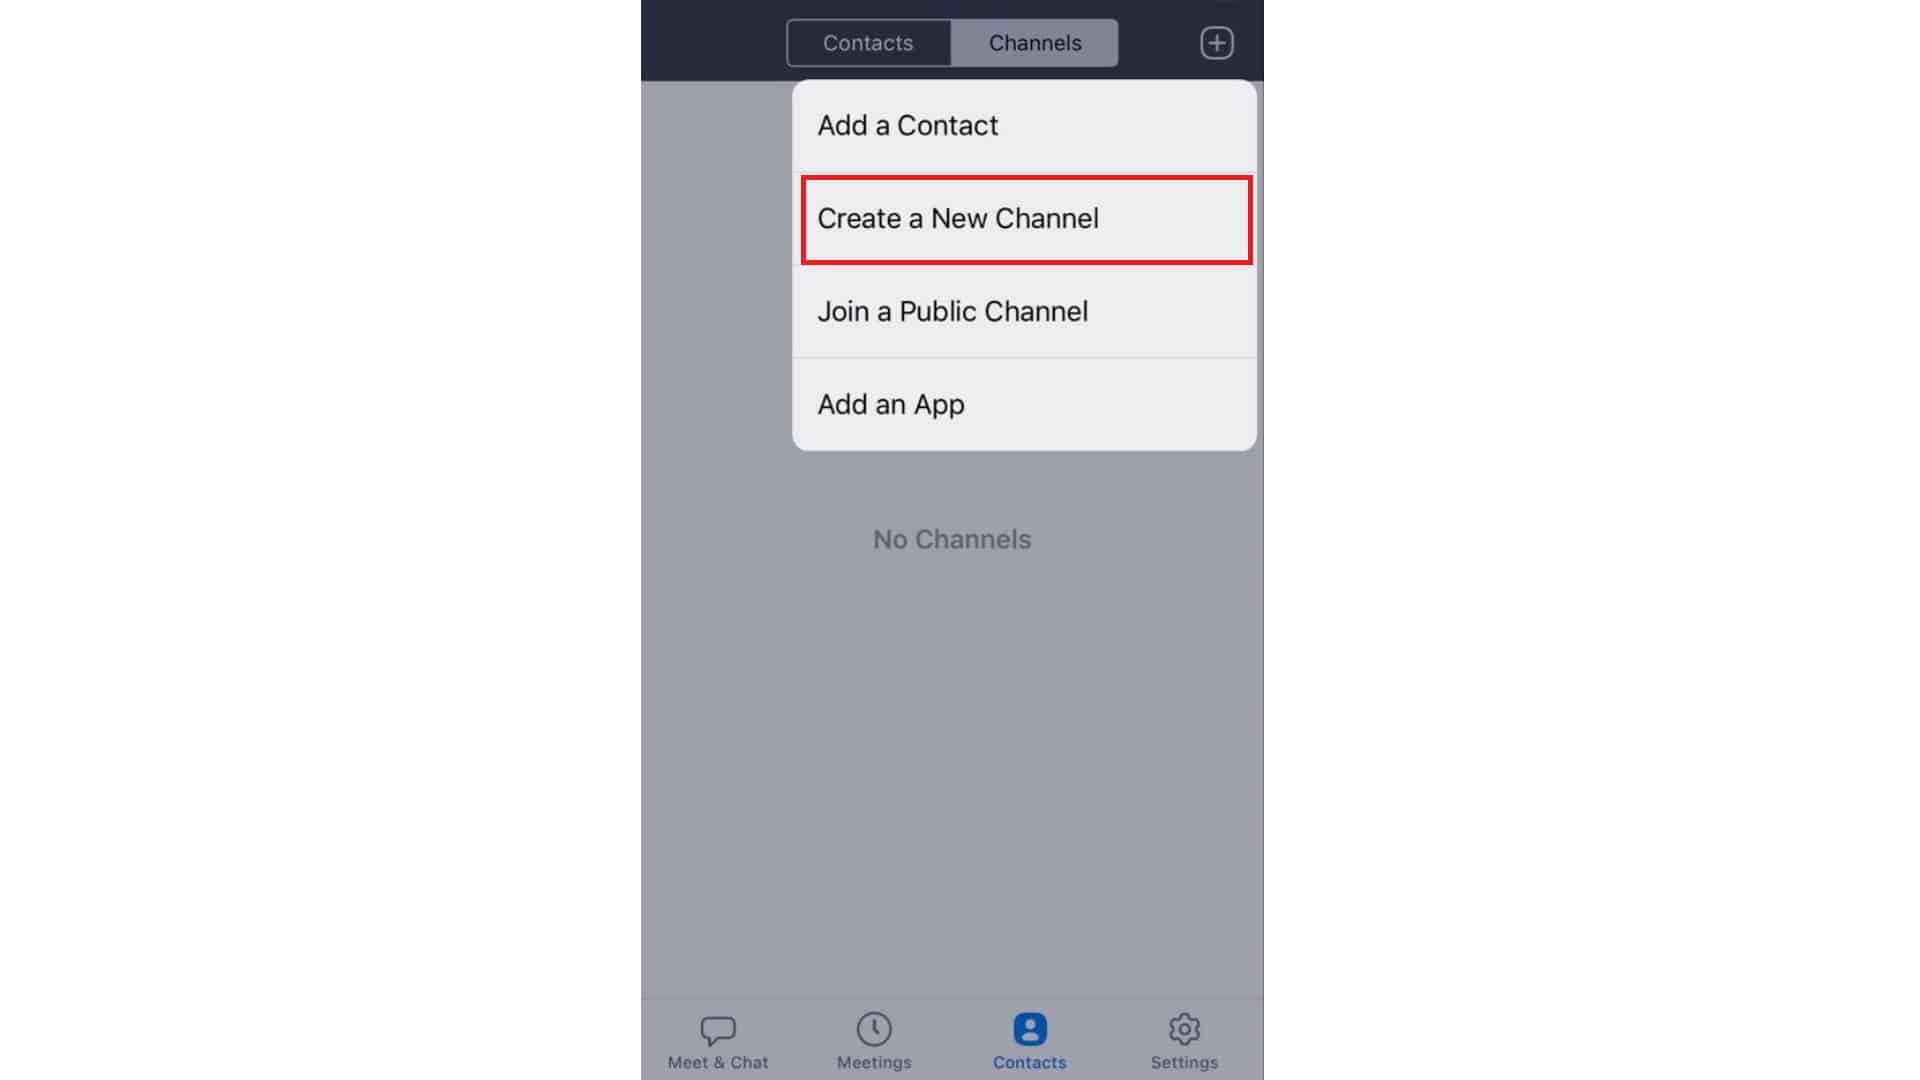 How-to-Create-a-New-Channel-on-Zoom for-iOS-2020-guide